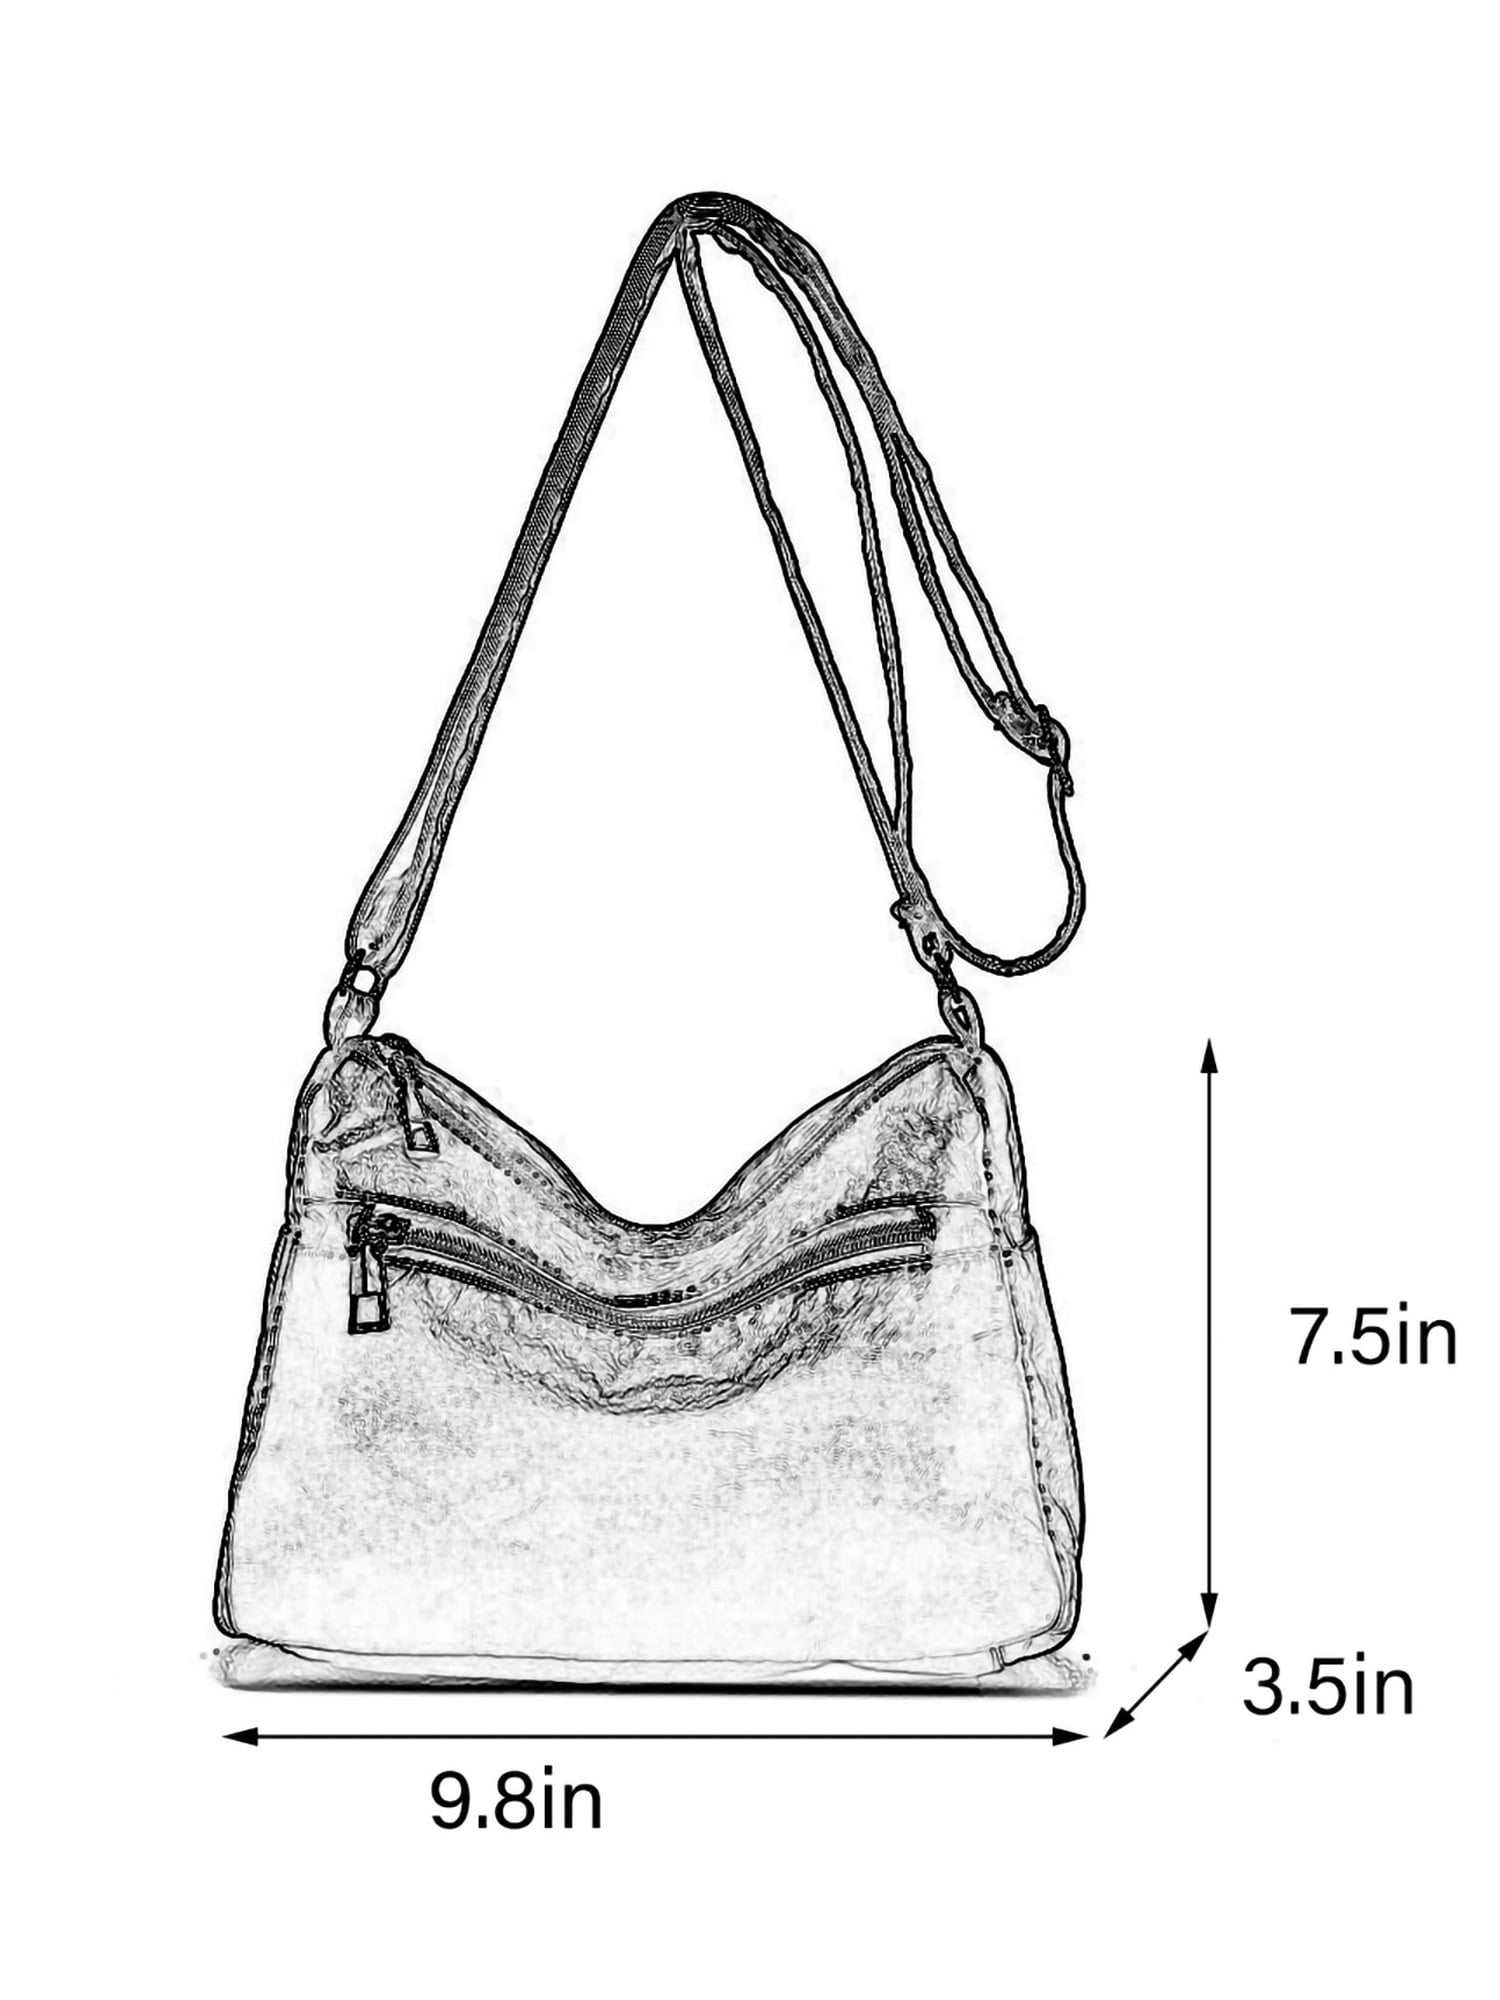 How To Draw - Drawing and designing beautiful women's bags